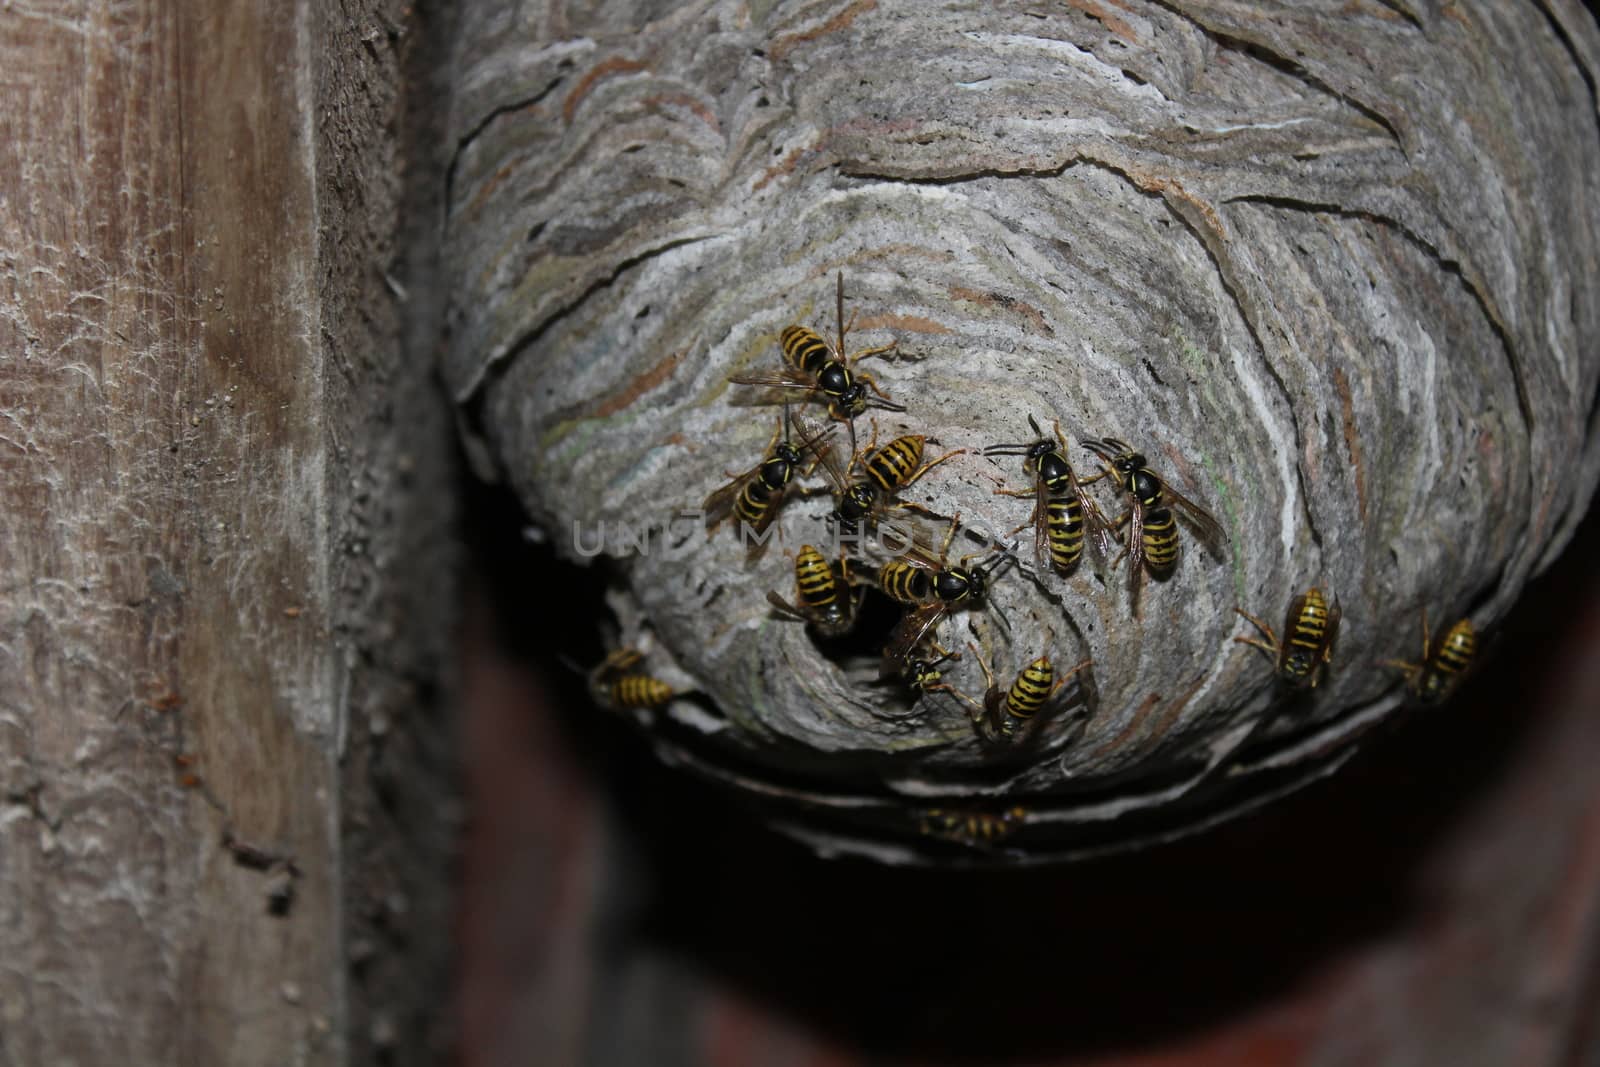 The picture shows wasps nest and wasps